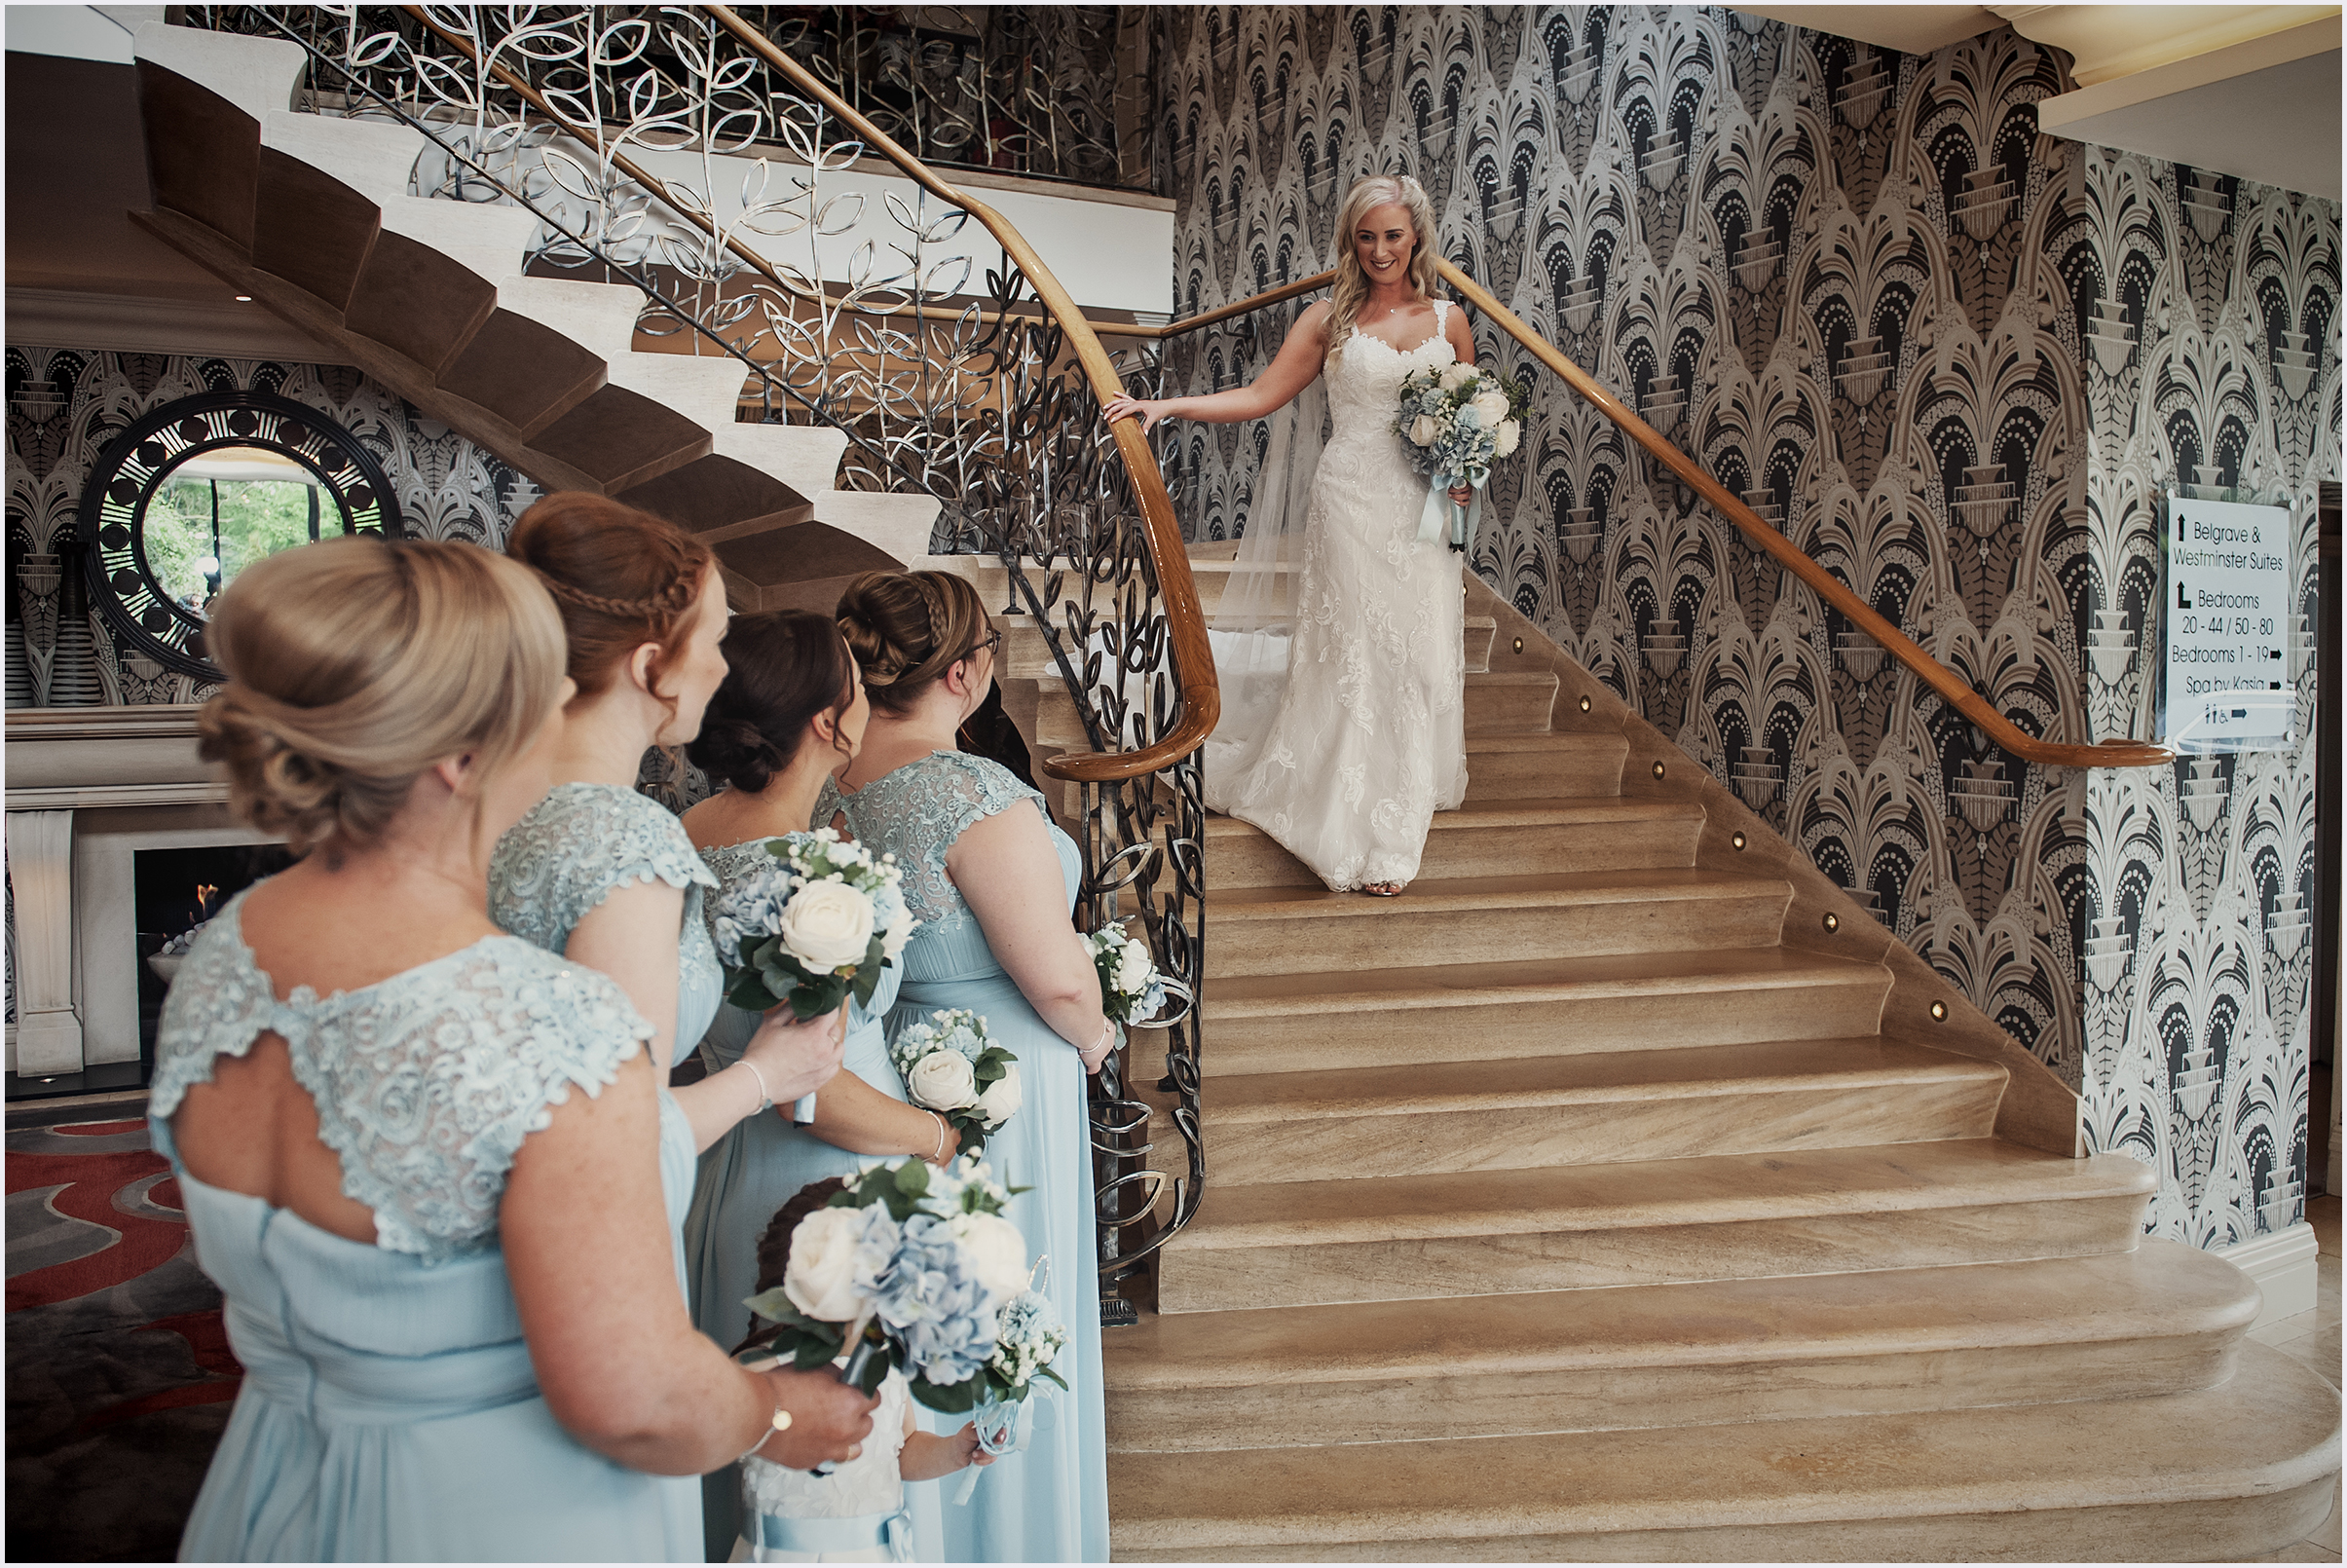 A bride walks down the beautiful staircase at The Grosvenor Pulford Hotel and Spa before her wedding ceremony.